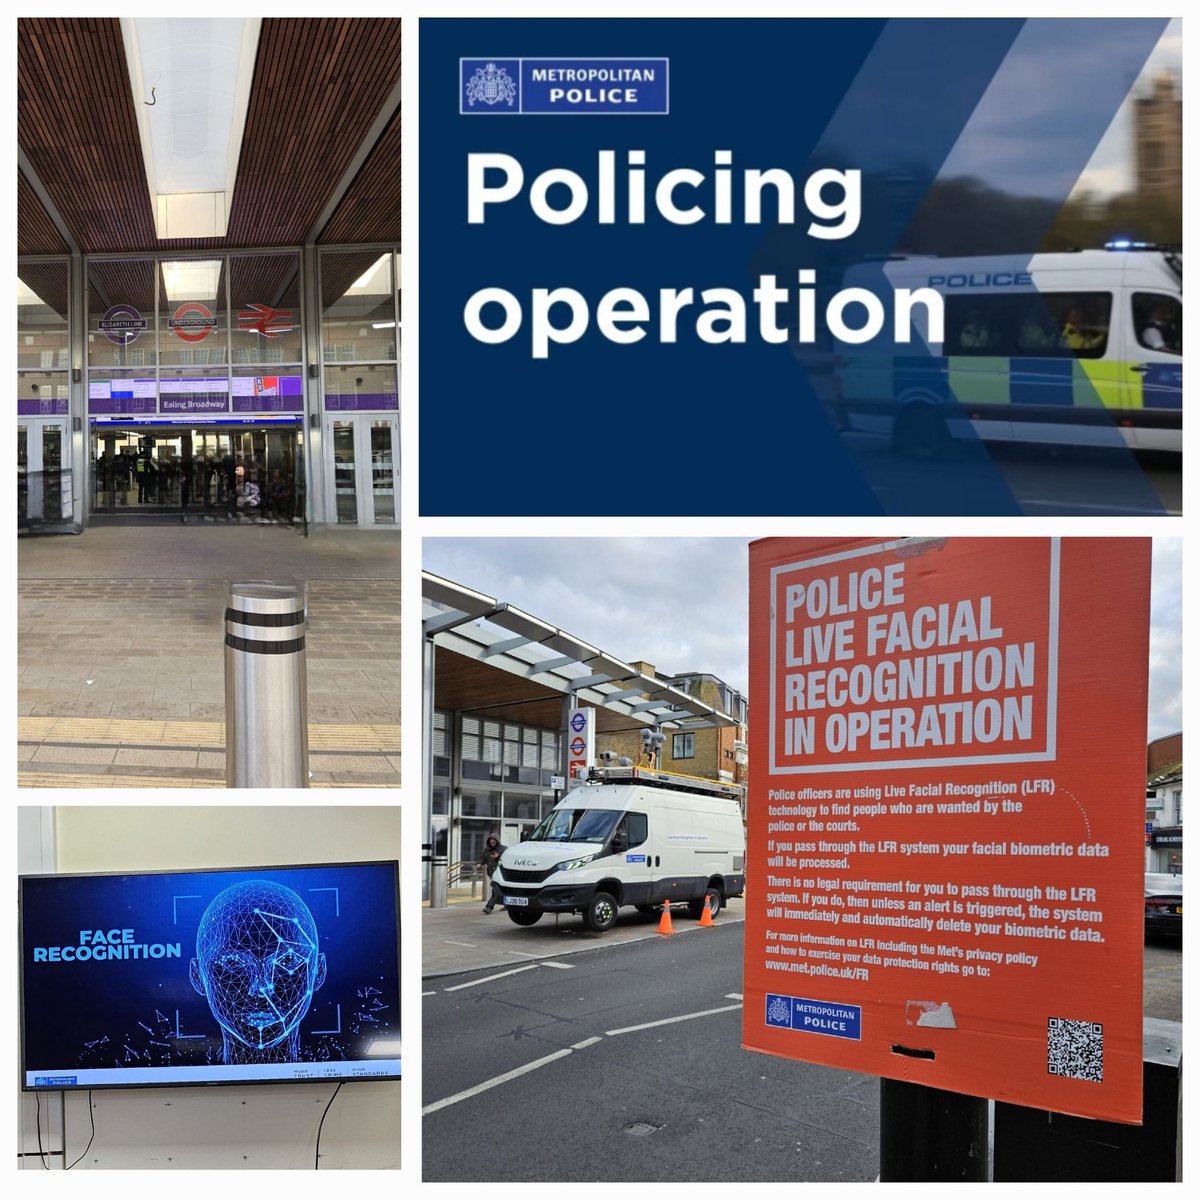 Southall officers assisted the first deployment of live facial recognition in Ealing Borough. This accurate technology is used to assist the Met in locating violent offenders, making Ealing a safer borough to live and work
#notonourwatch